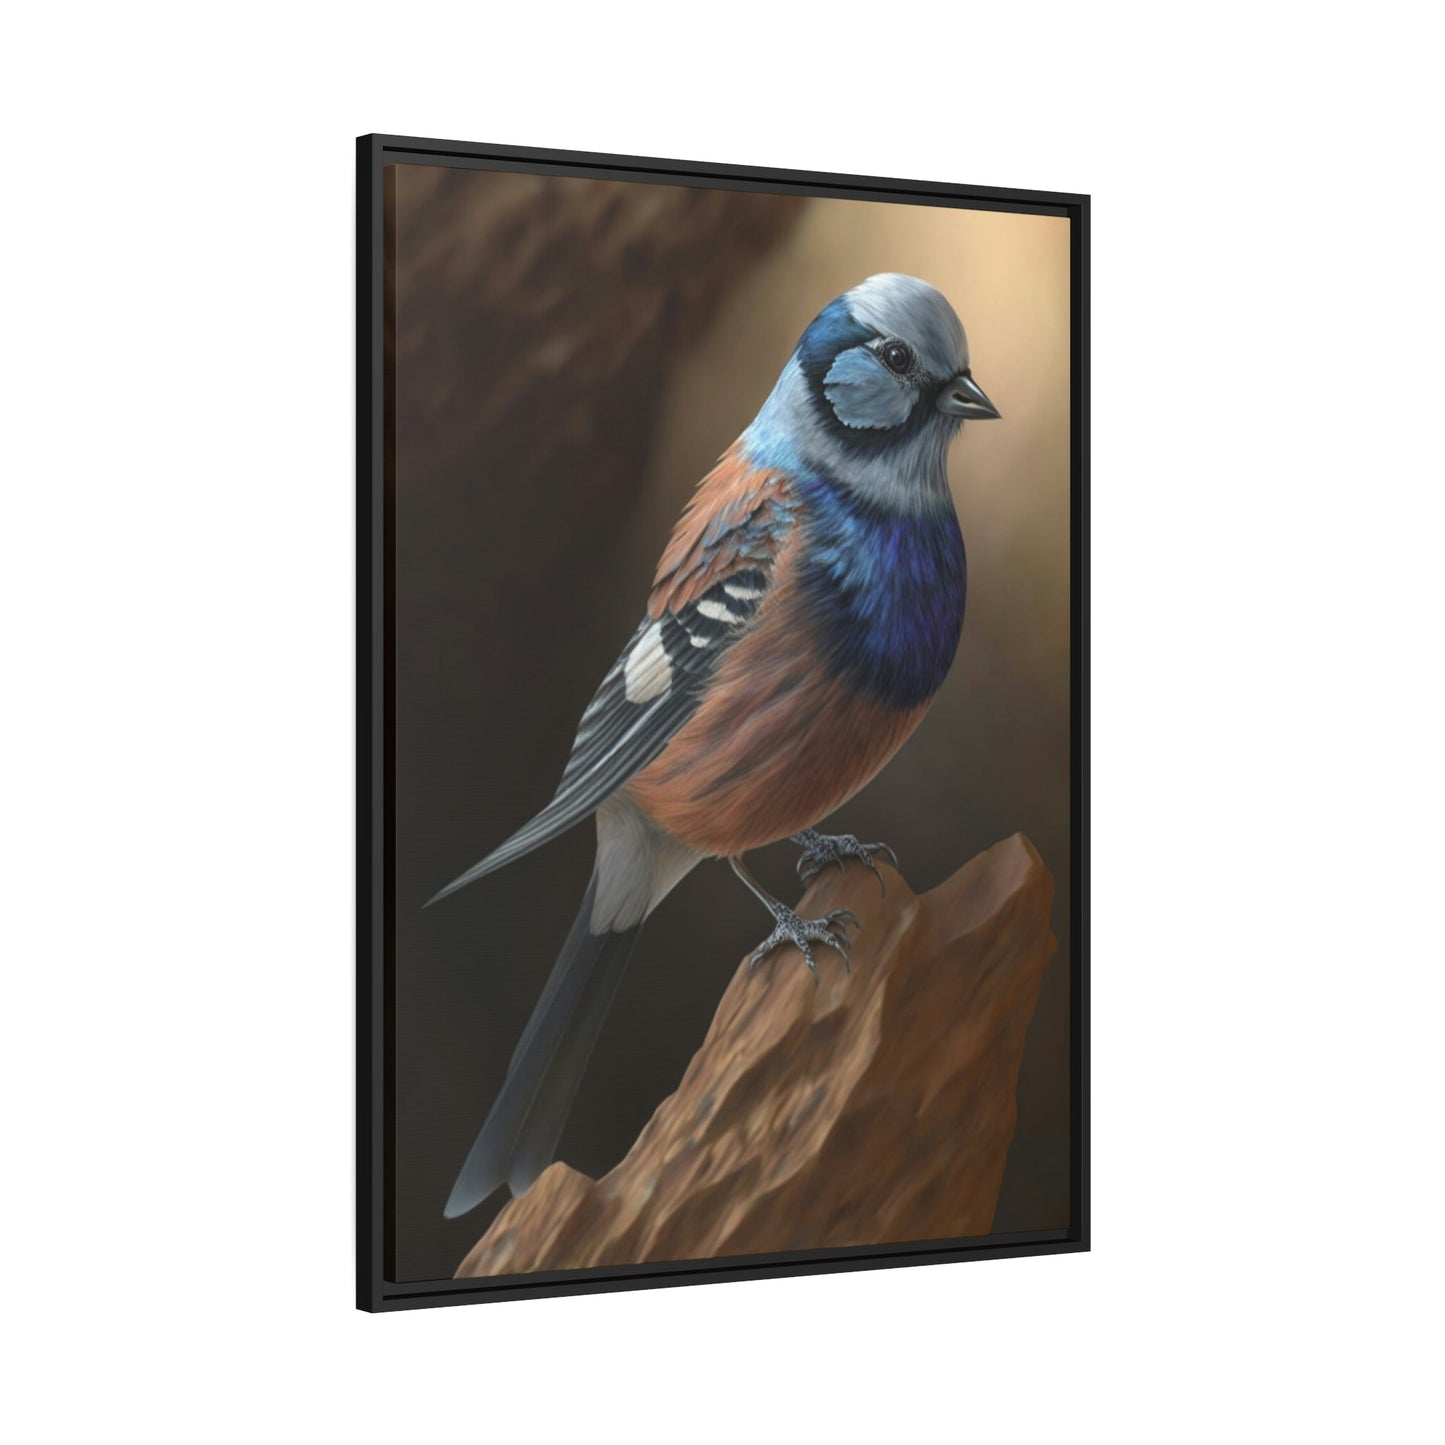 The Rainbow of Feathers: A Print on Canvas & Poster of Birds with Vivid Colors